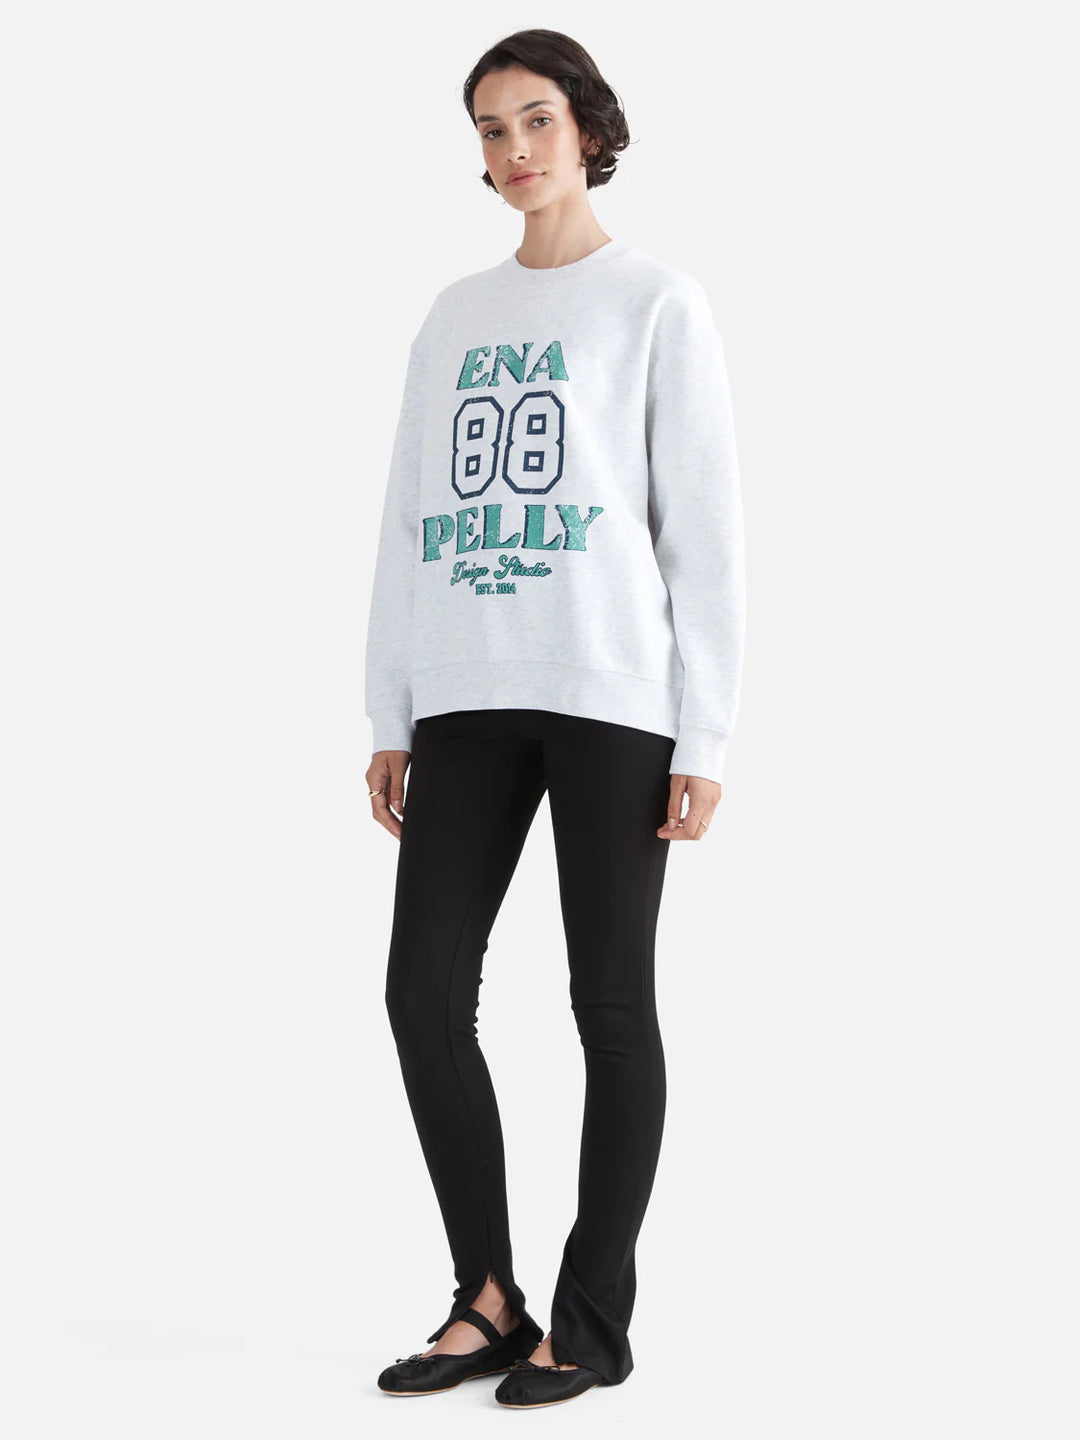 Derby Oversized Sweater- White Marle